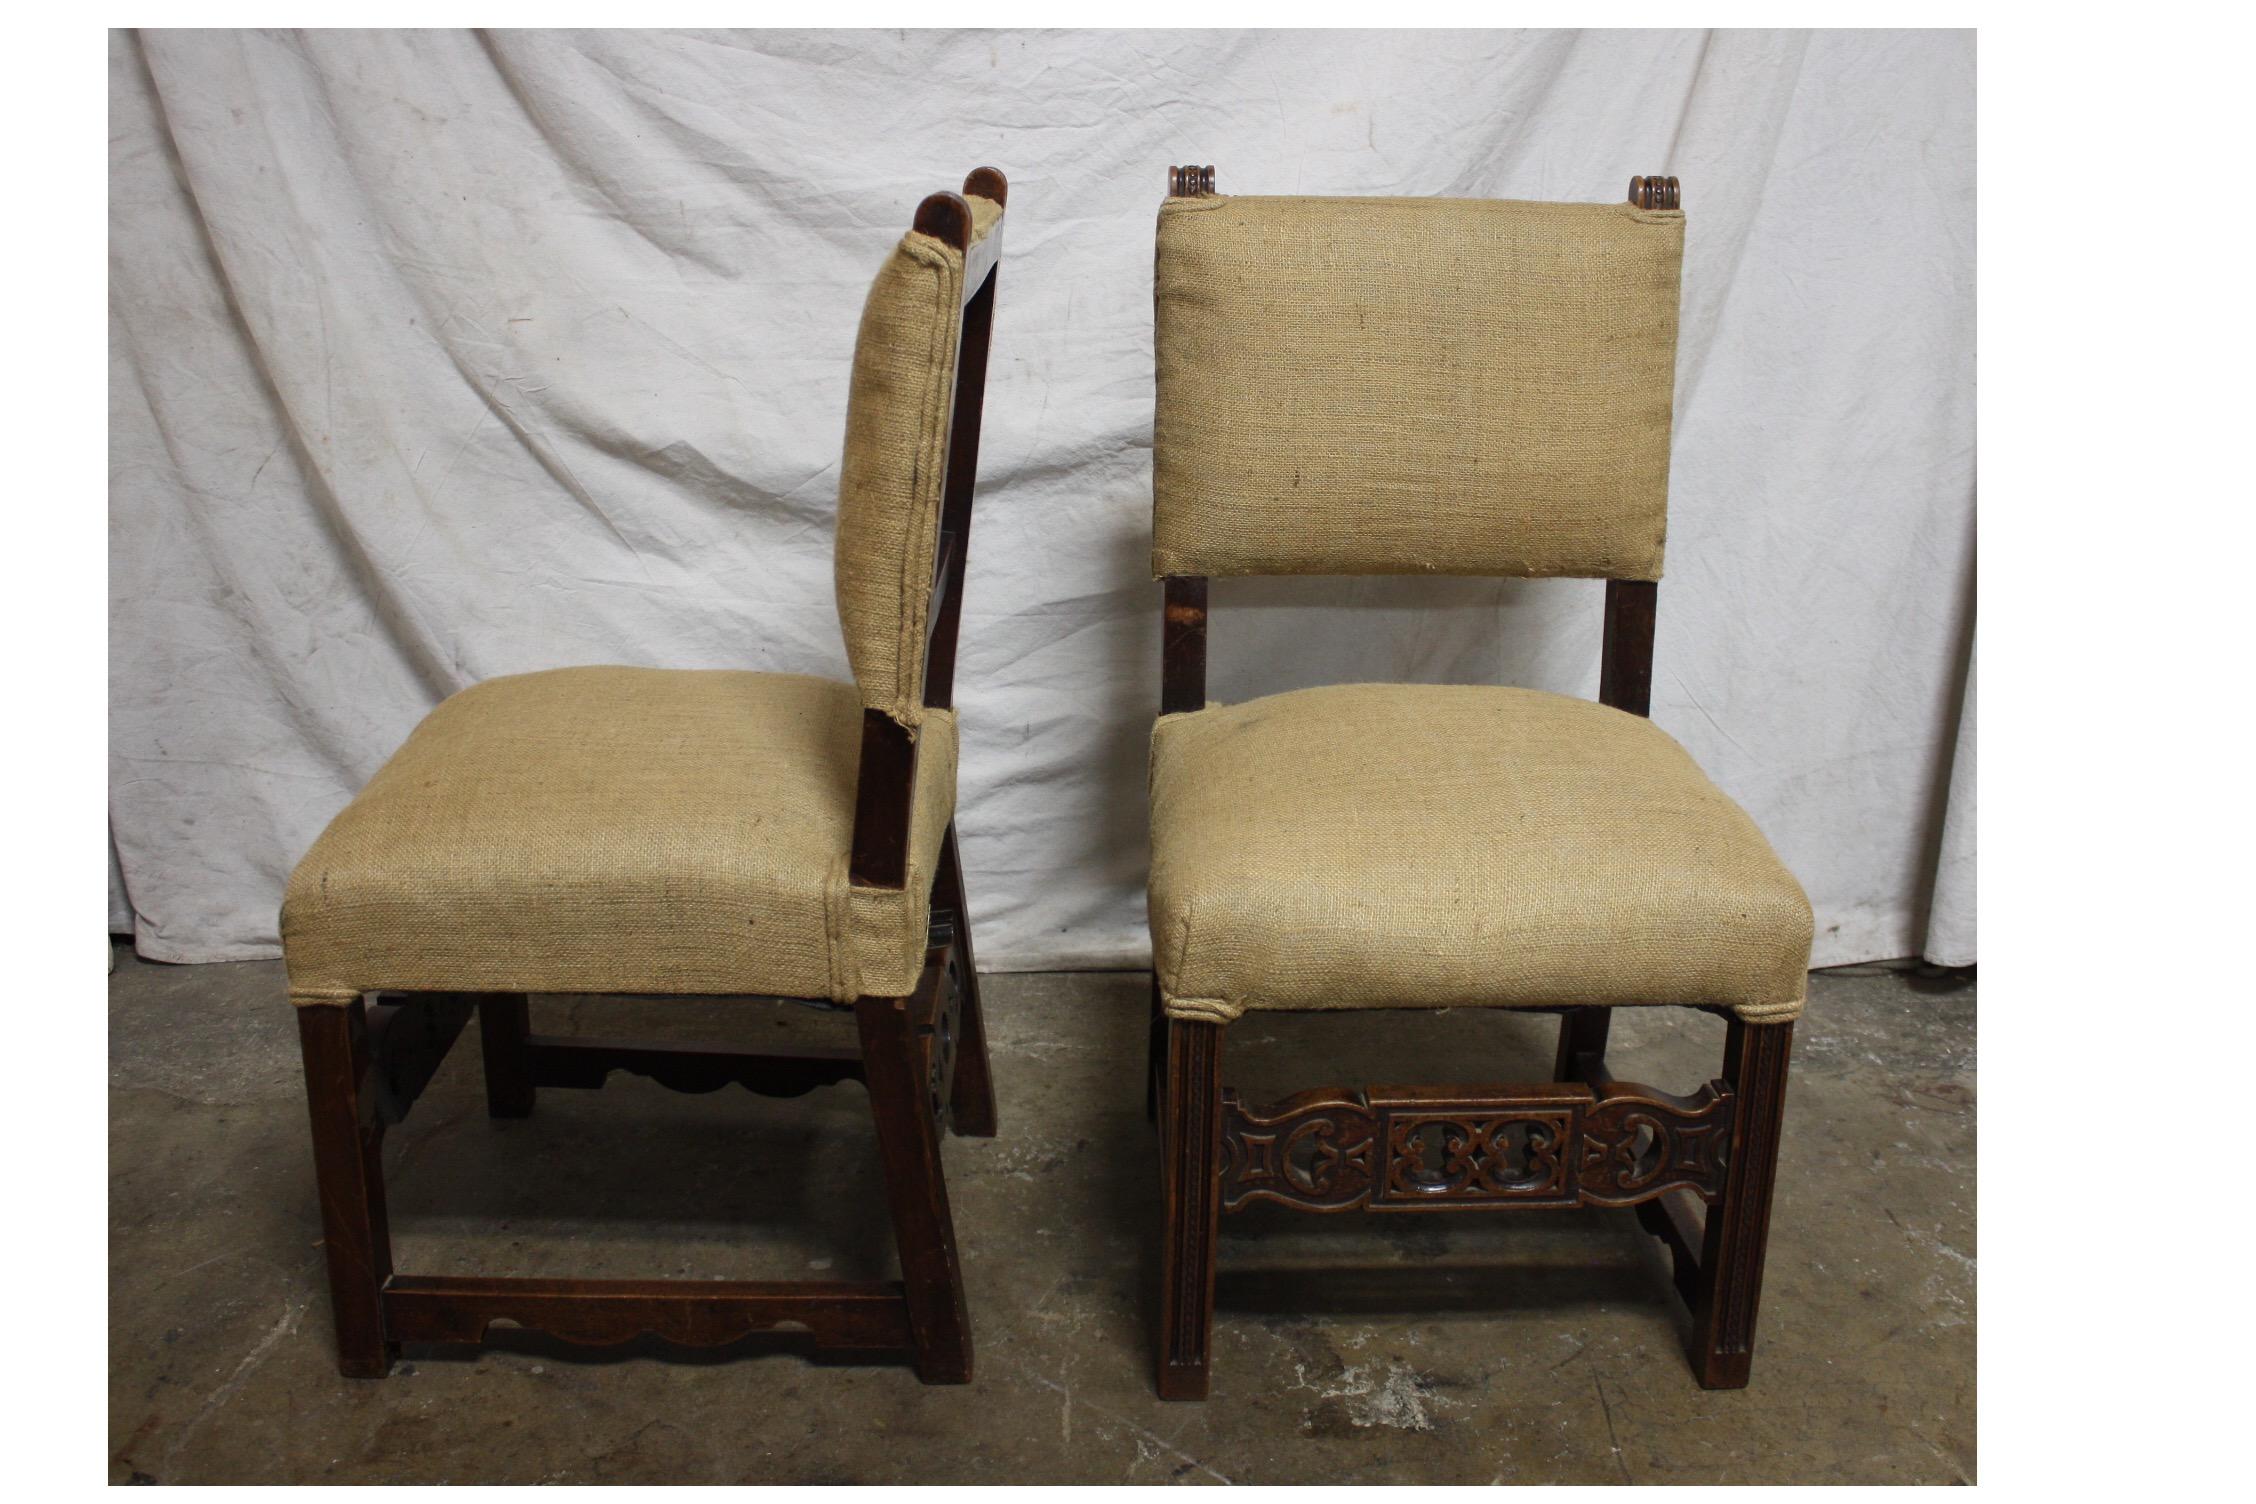 Pair of French 19th Century Chairs In Good Condition For Sale In Stockbridge, GA